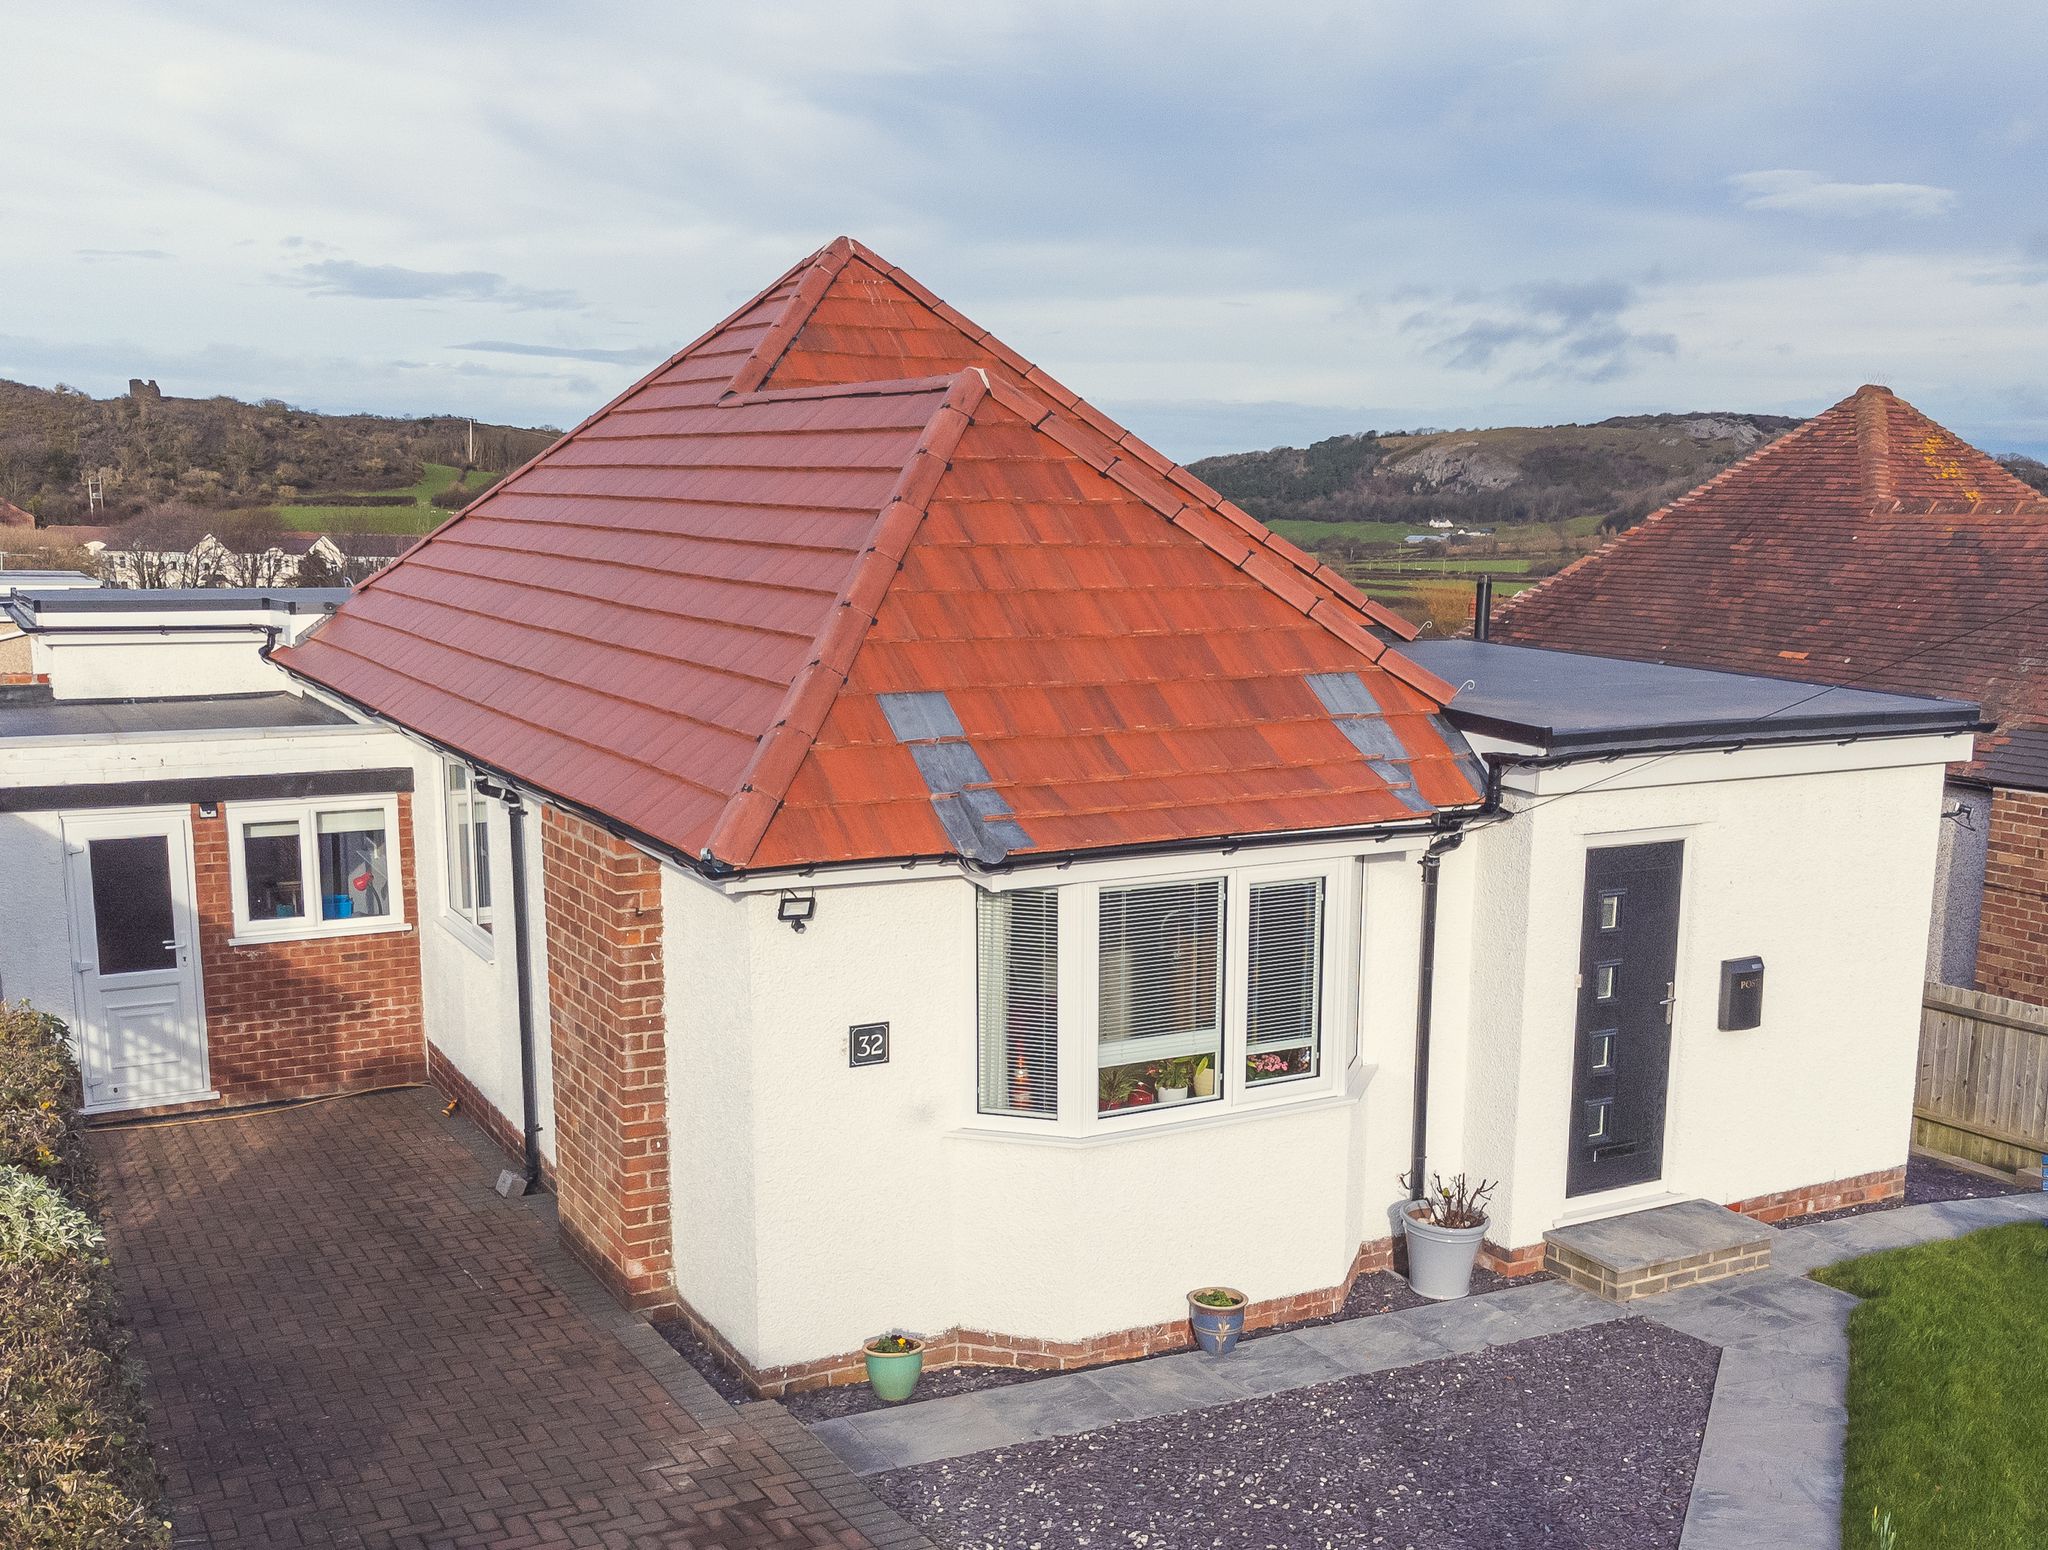 Tile Roof Contractors Clawdd-newydd, LL15 - DD Roofing